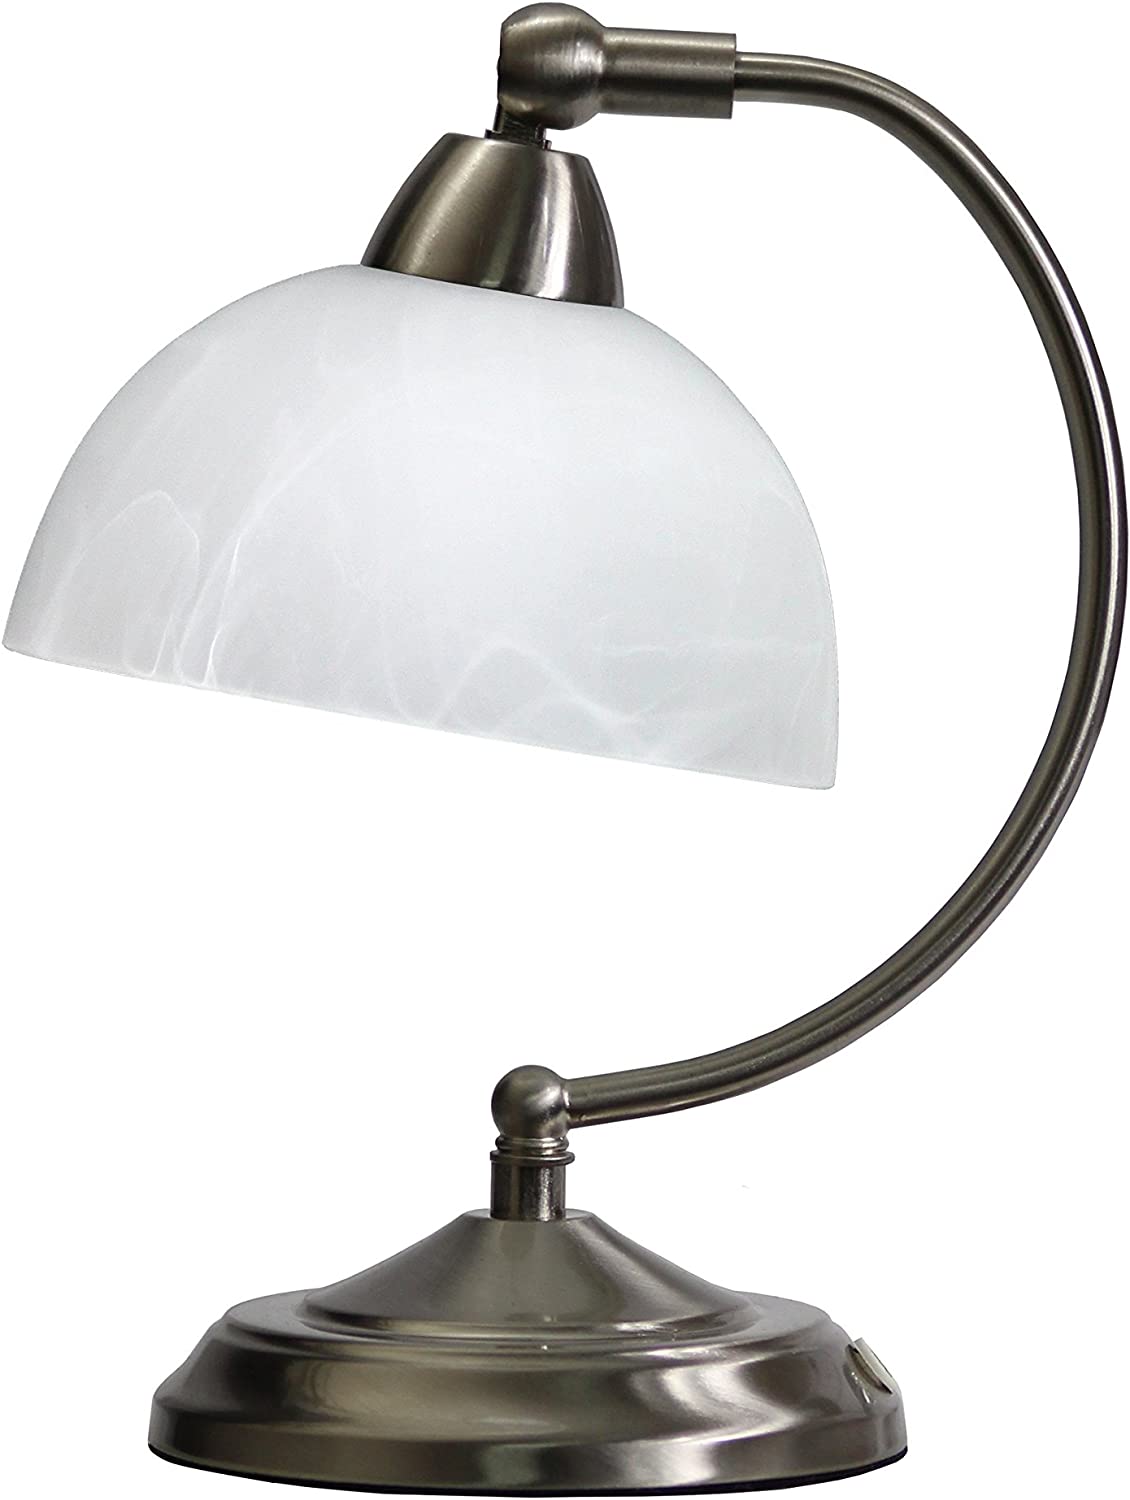 Elegant Designs LT2029-BSN Mini Modern Bankers Table Desk Lamp with Touch Dimmer Control Base, Brushed Nickel